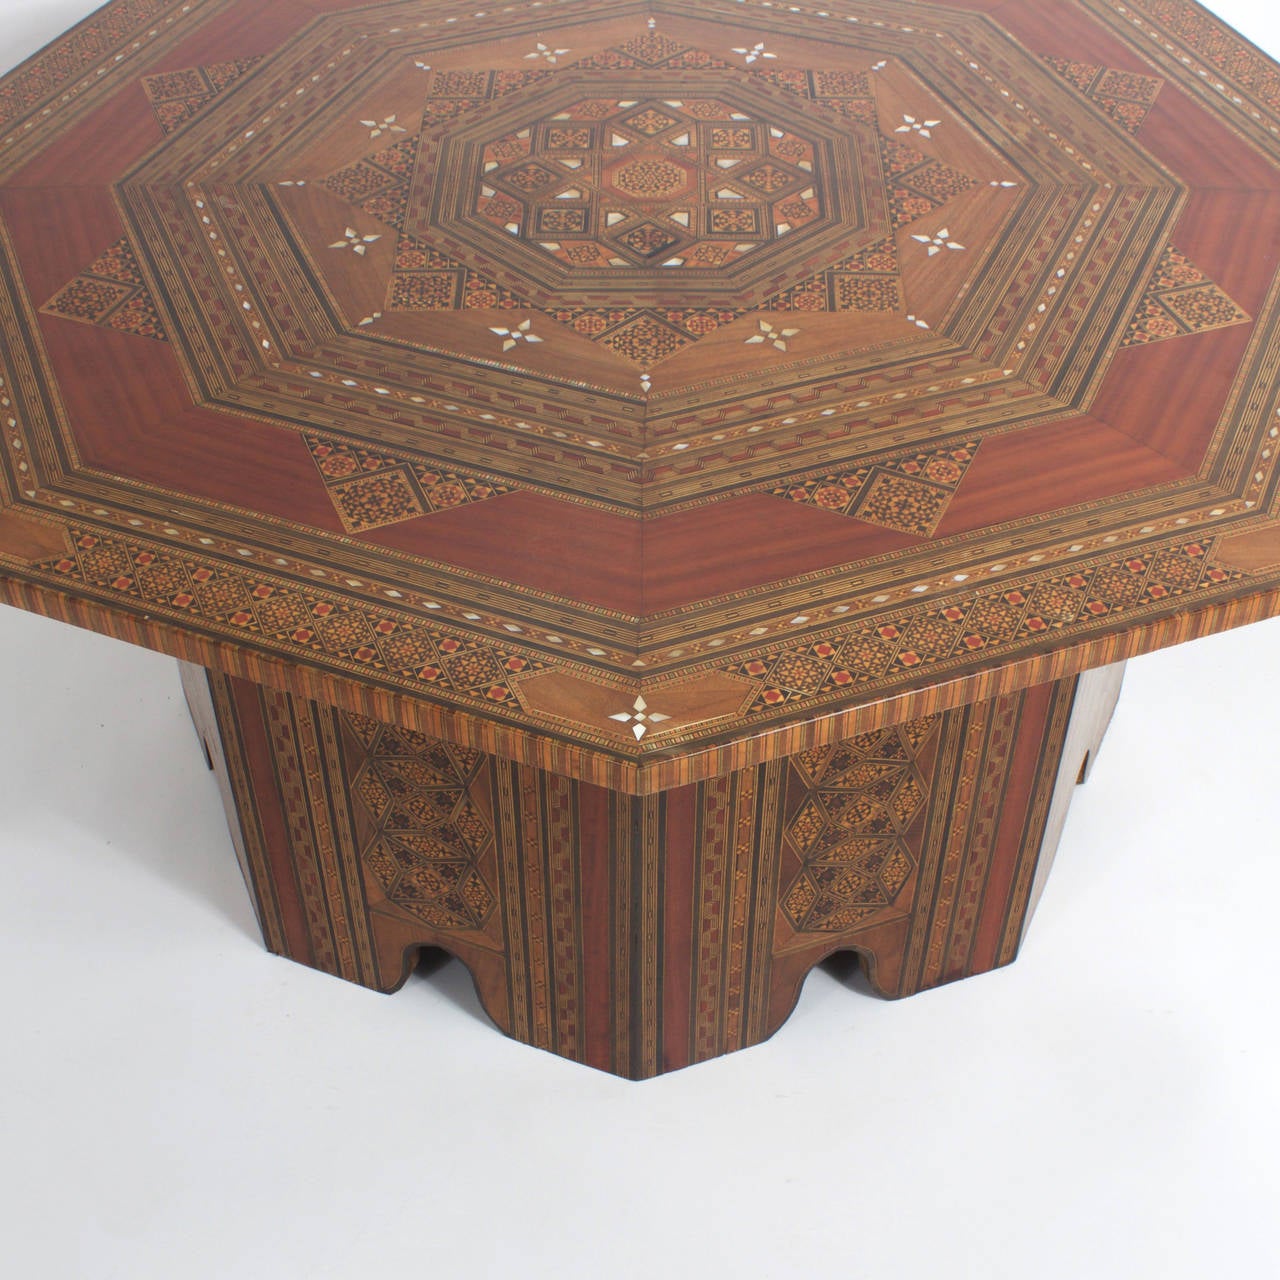 Important Syrian coffee table or cocktail table having an octagonal top with marquetry and inlays of exotic woods, bone and mother of pearl in geometric shapes. All 8 sides of the base with Marquetry and Architectural arches. Large scale makes this